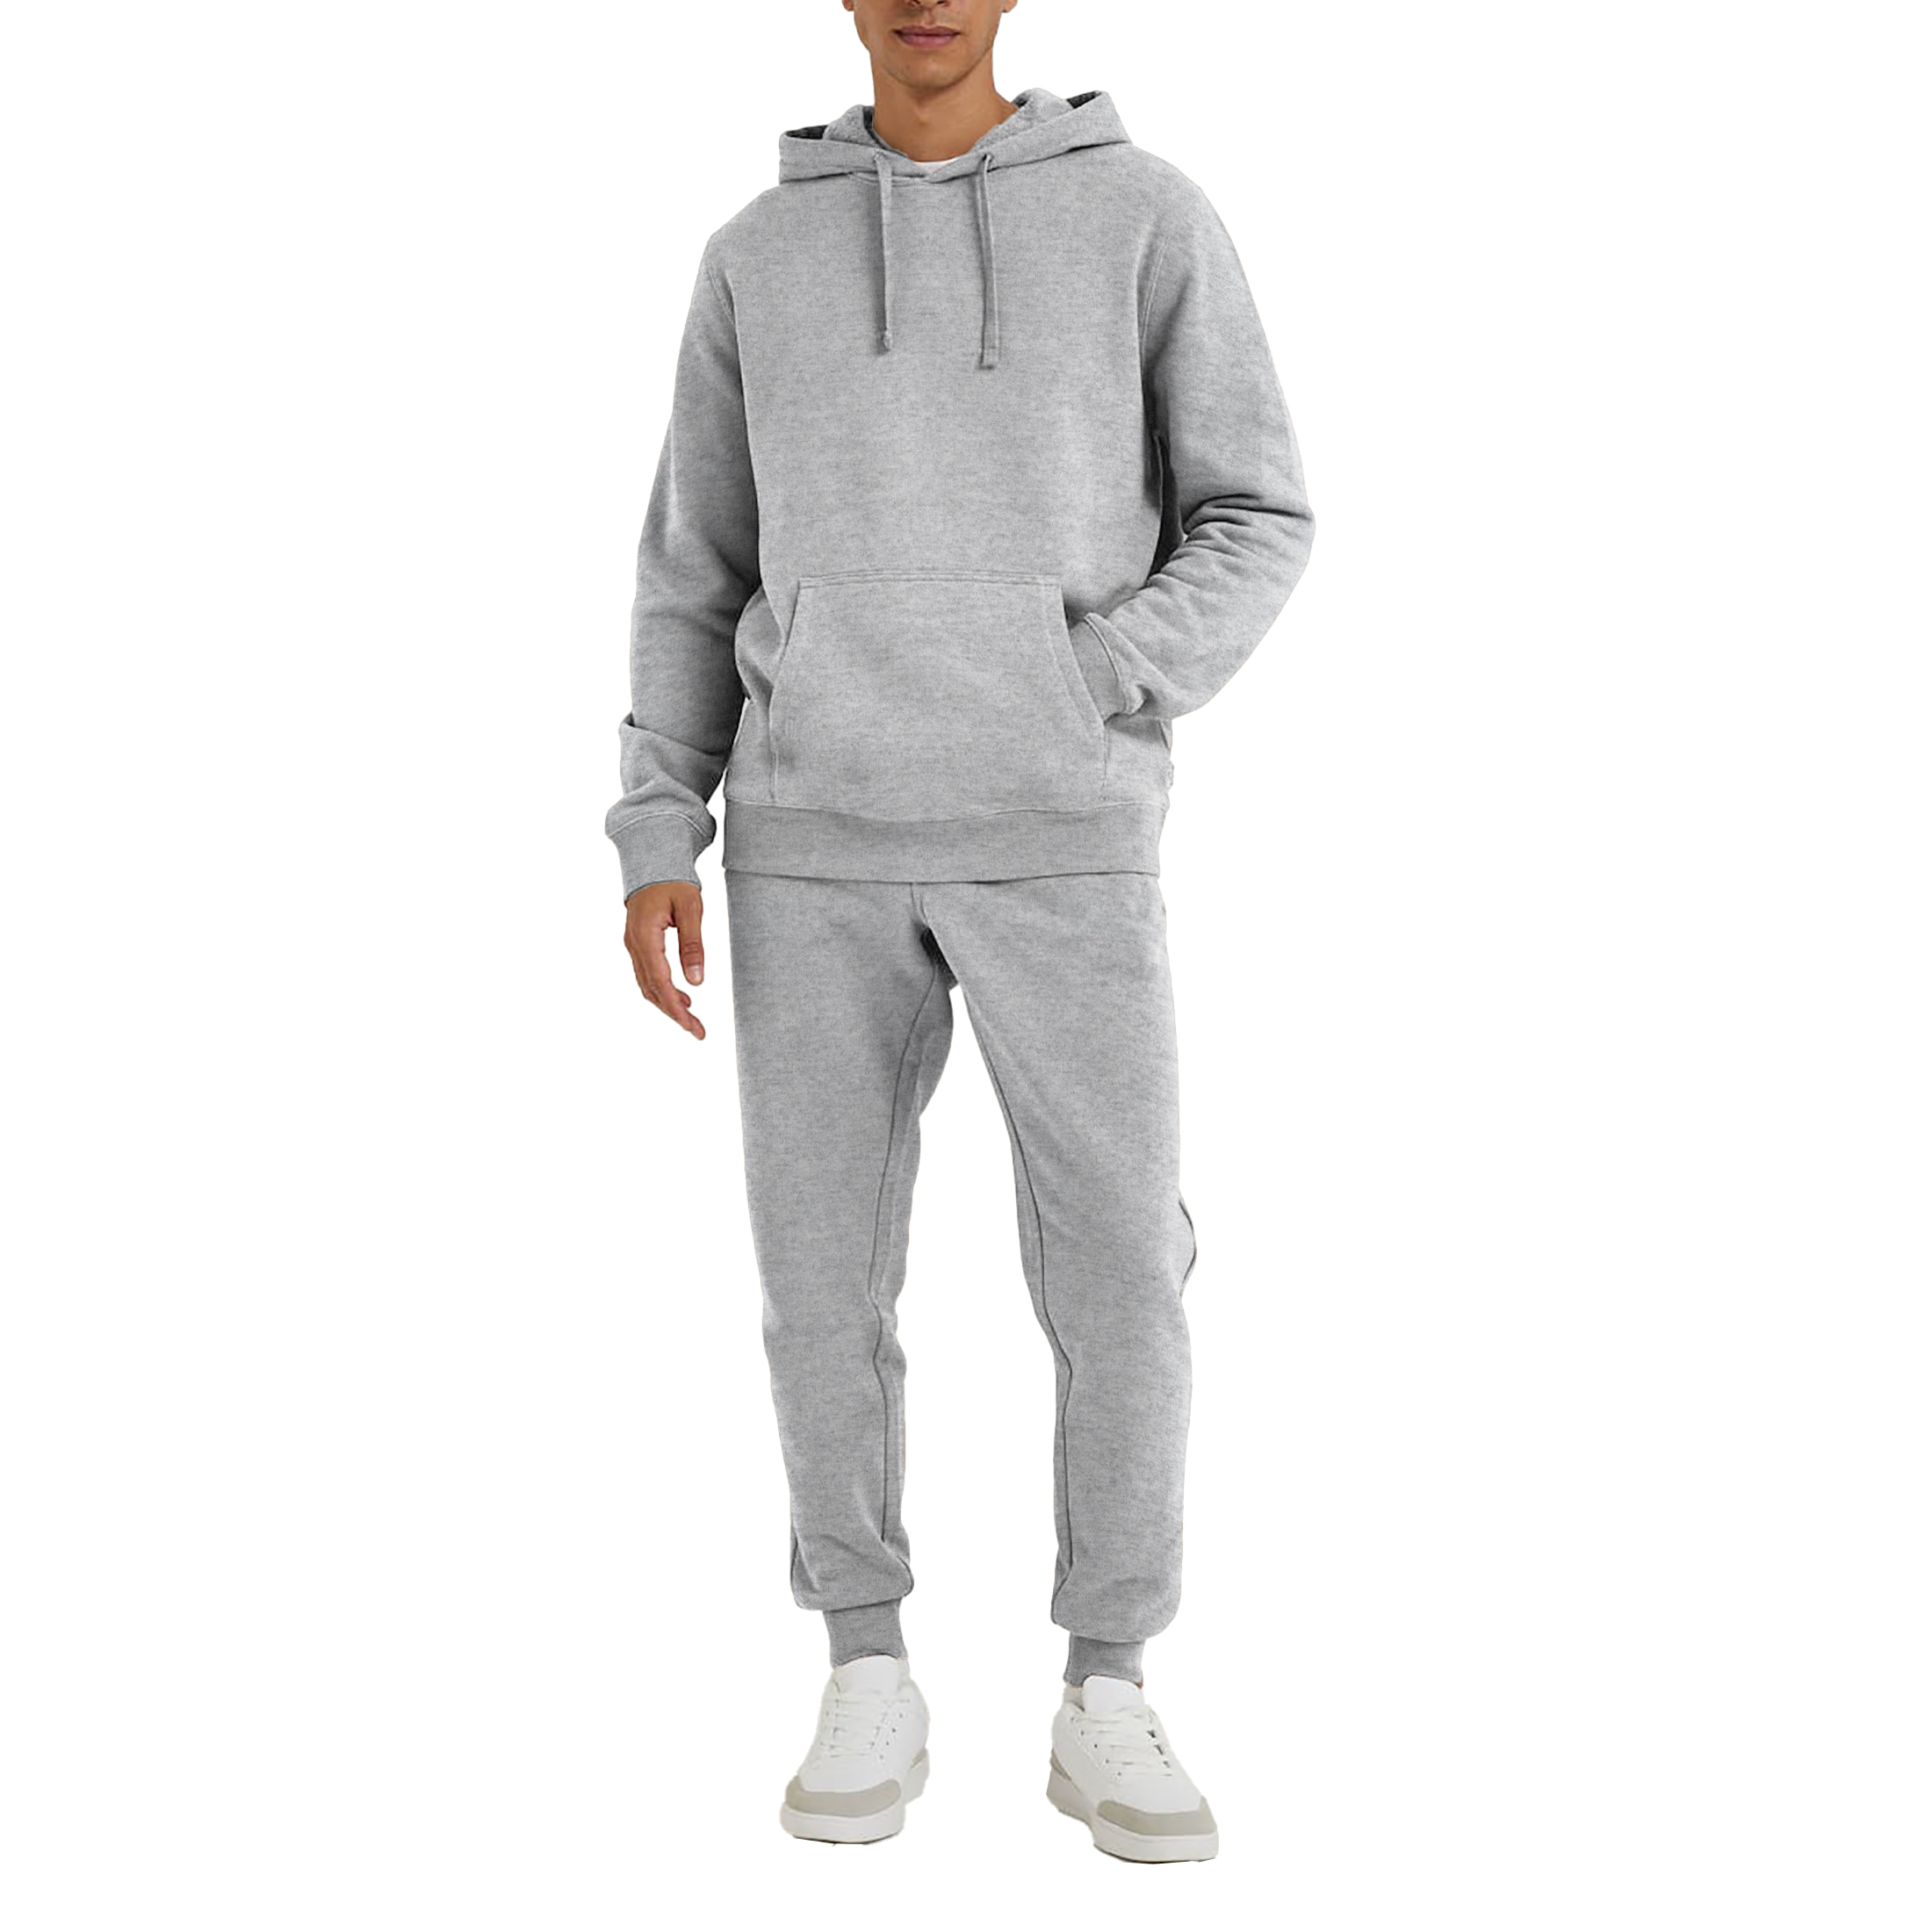 Men's Athletic Warm Jogging Pullover Active Tracksuit - Grey, Large